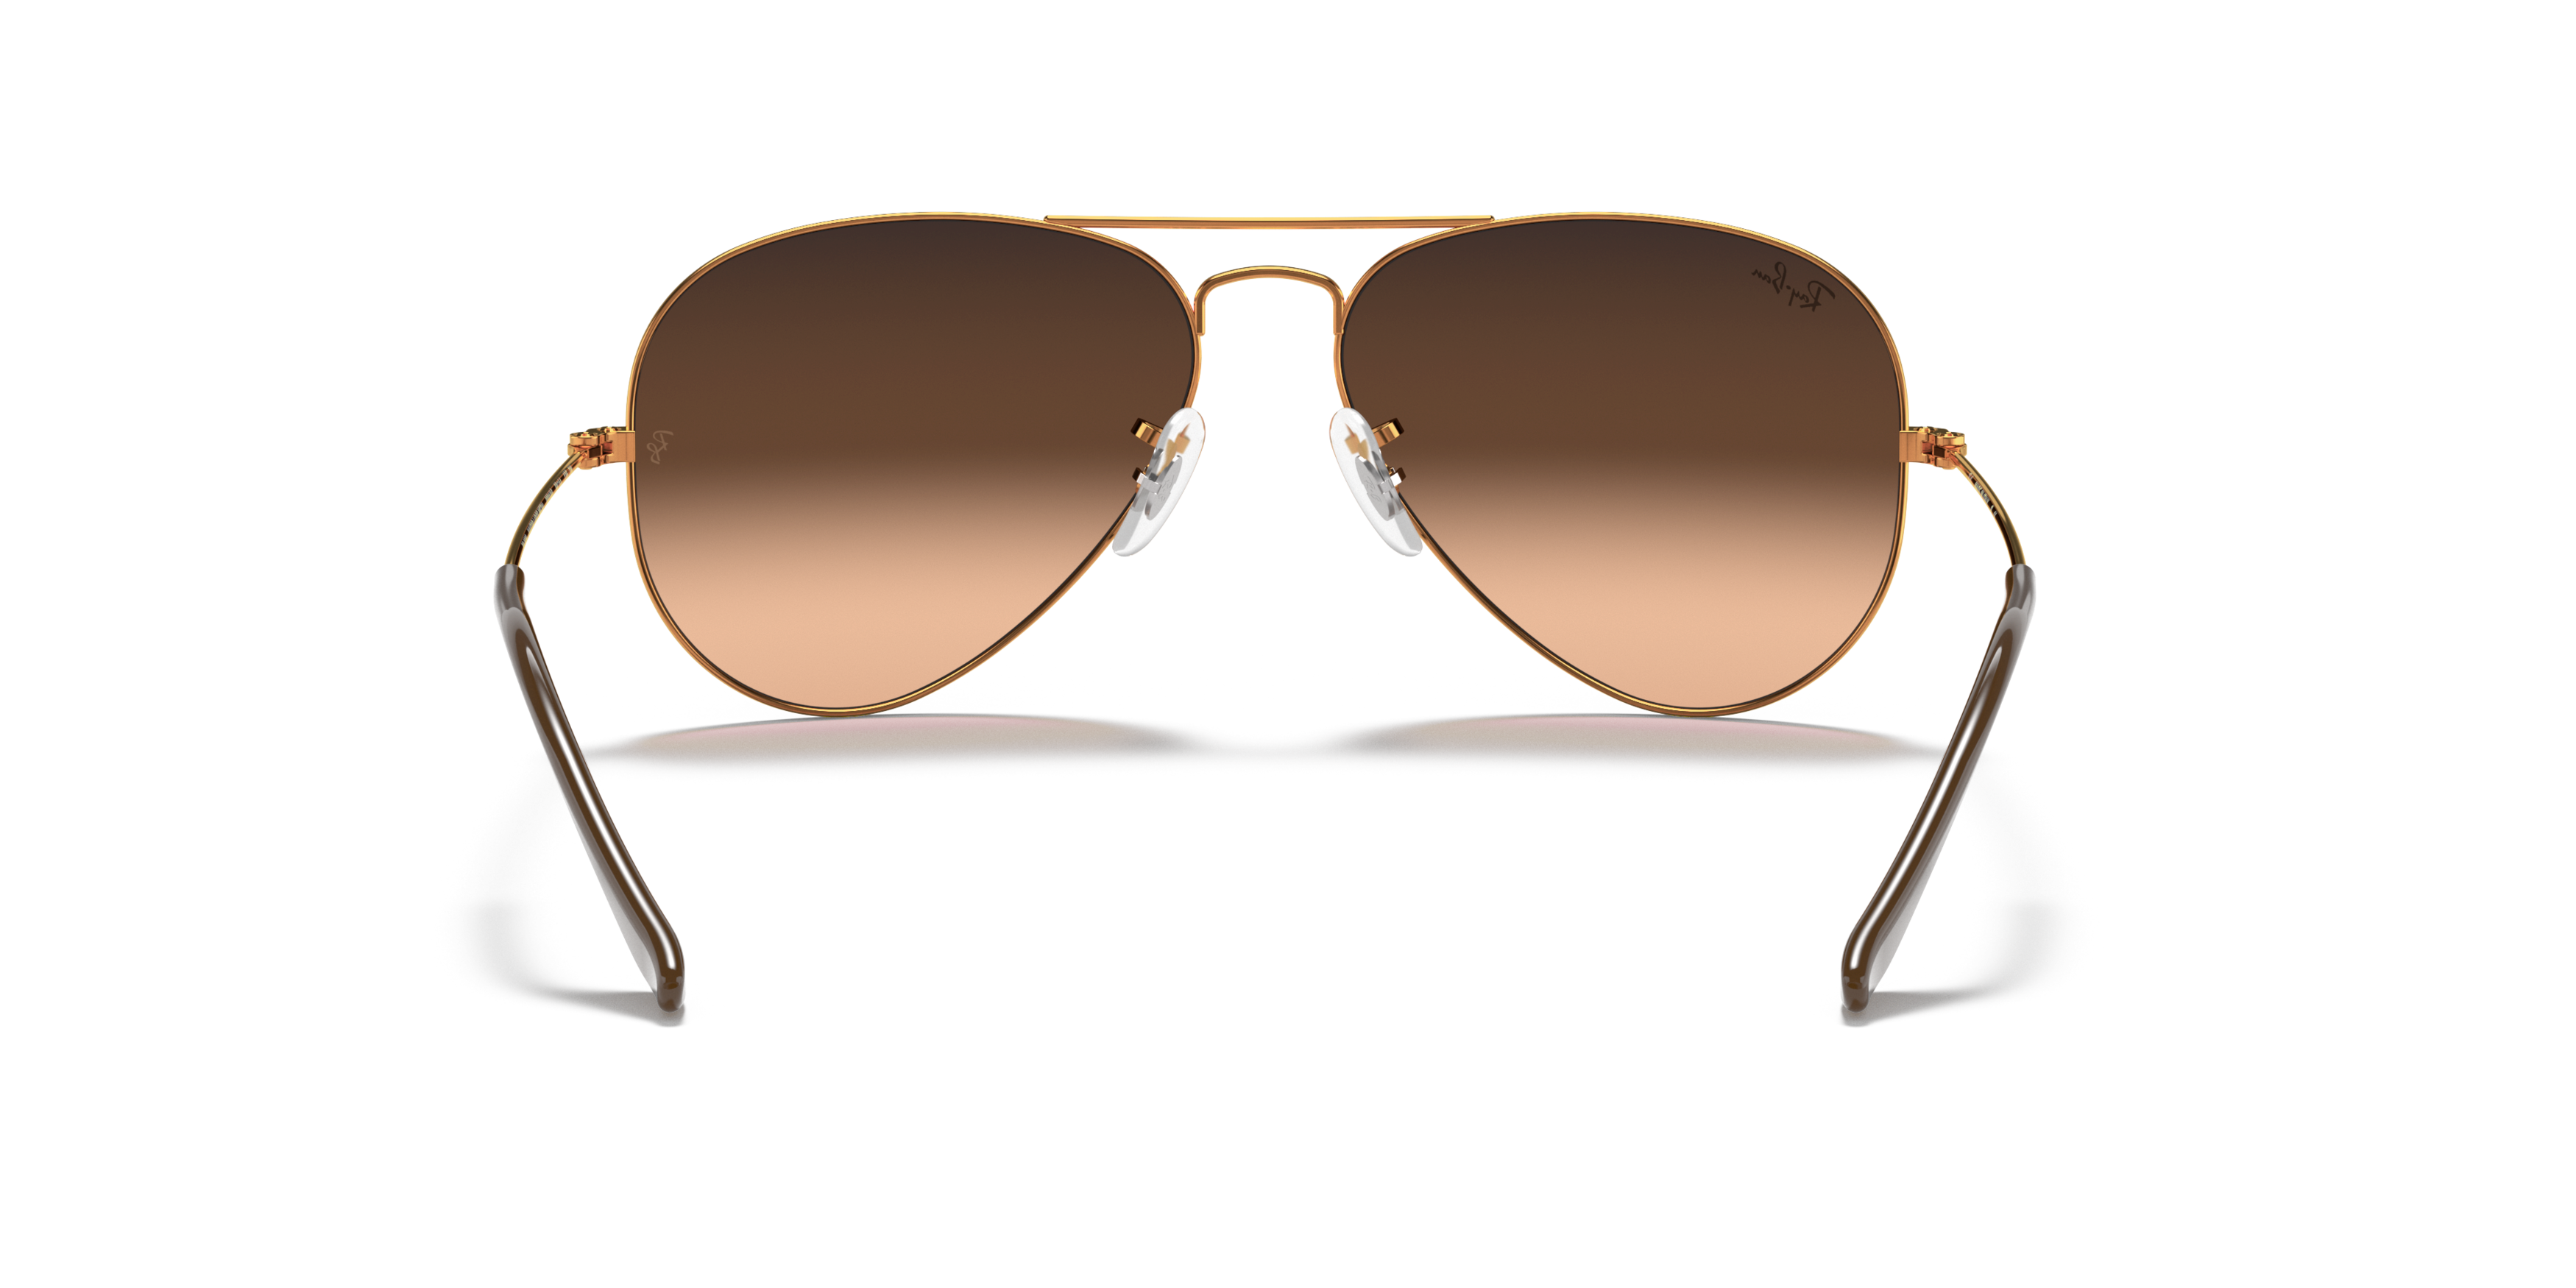 [products.image.detail02] Ray-Ban Aviator Large Metal RB3025 9001A5